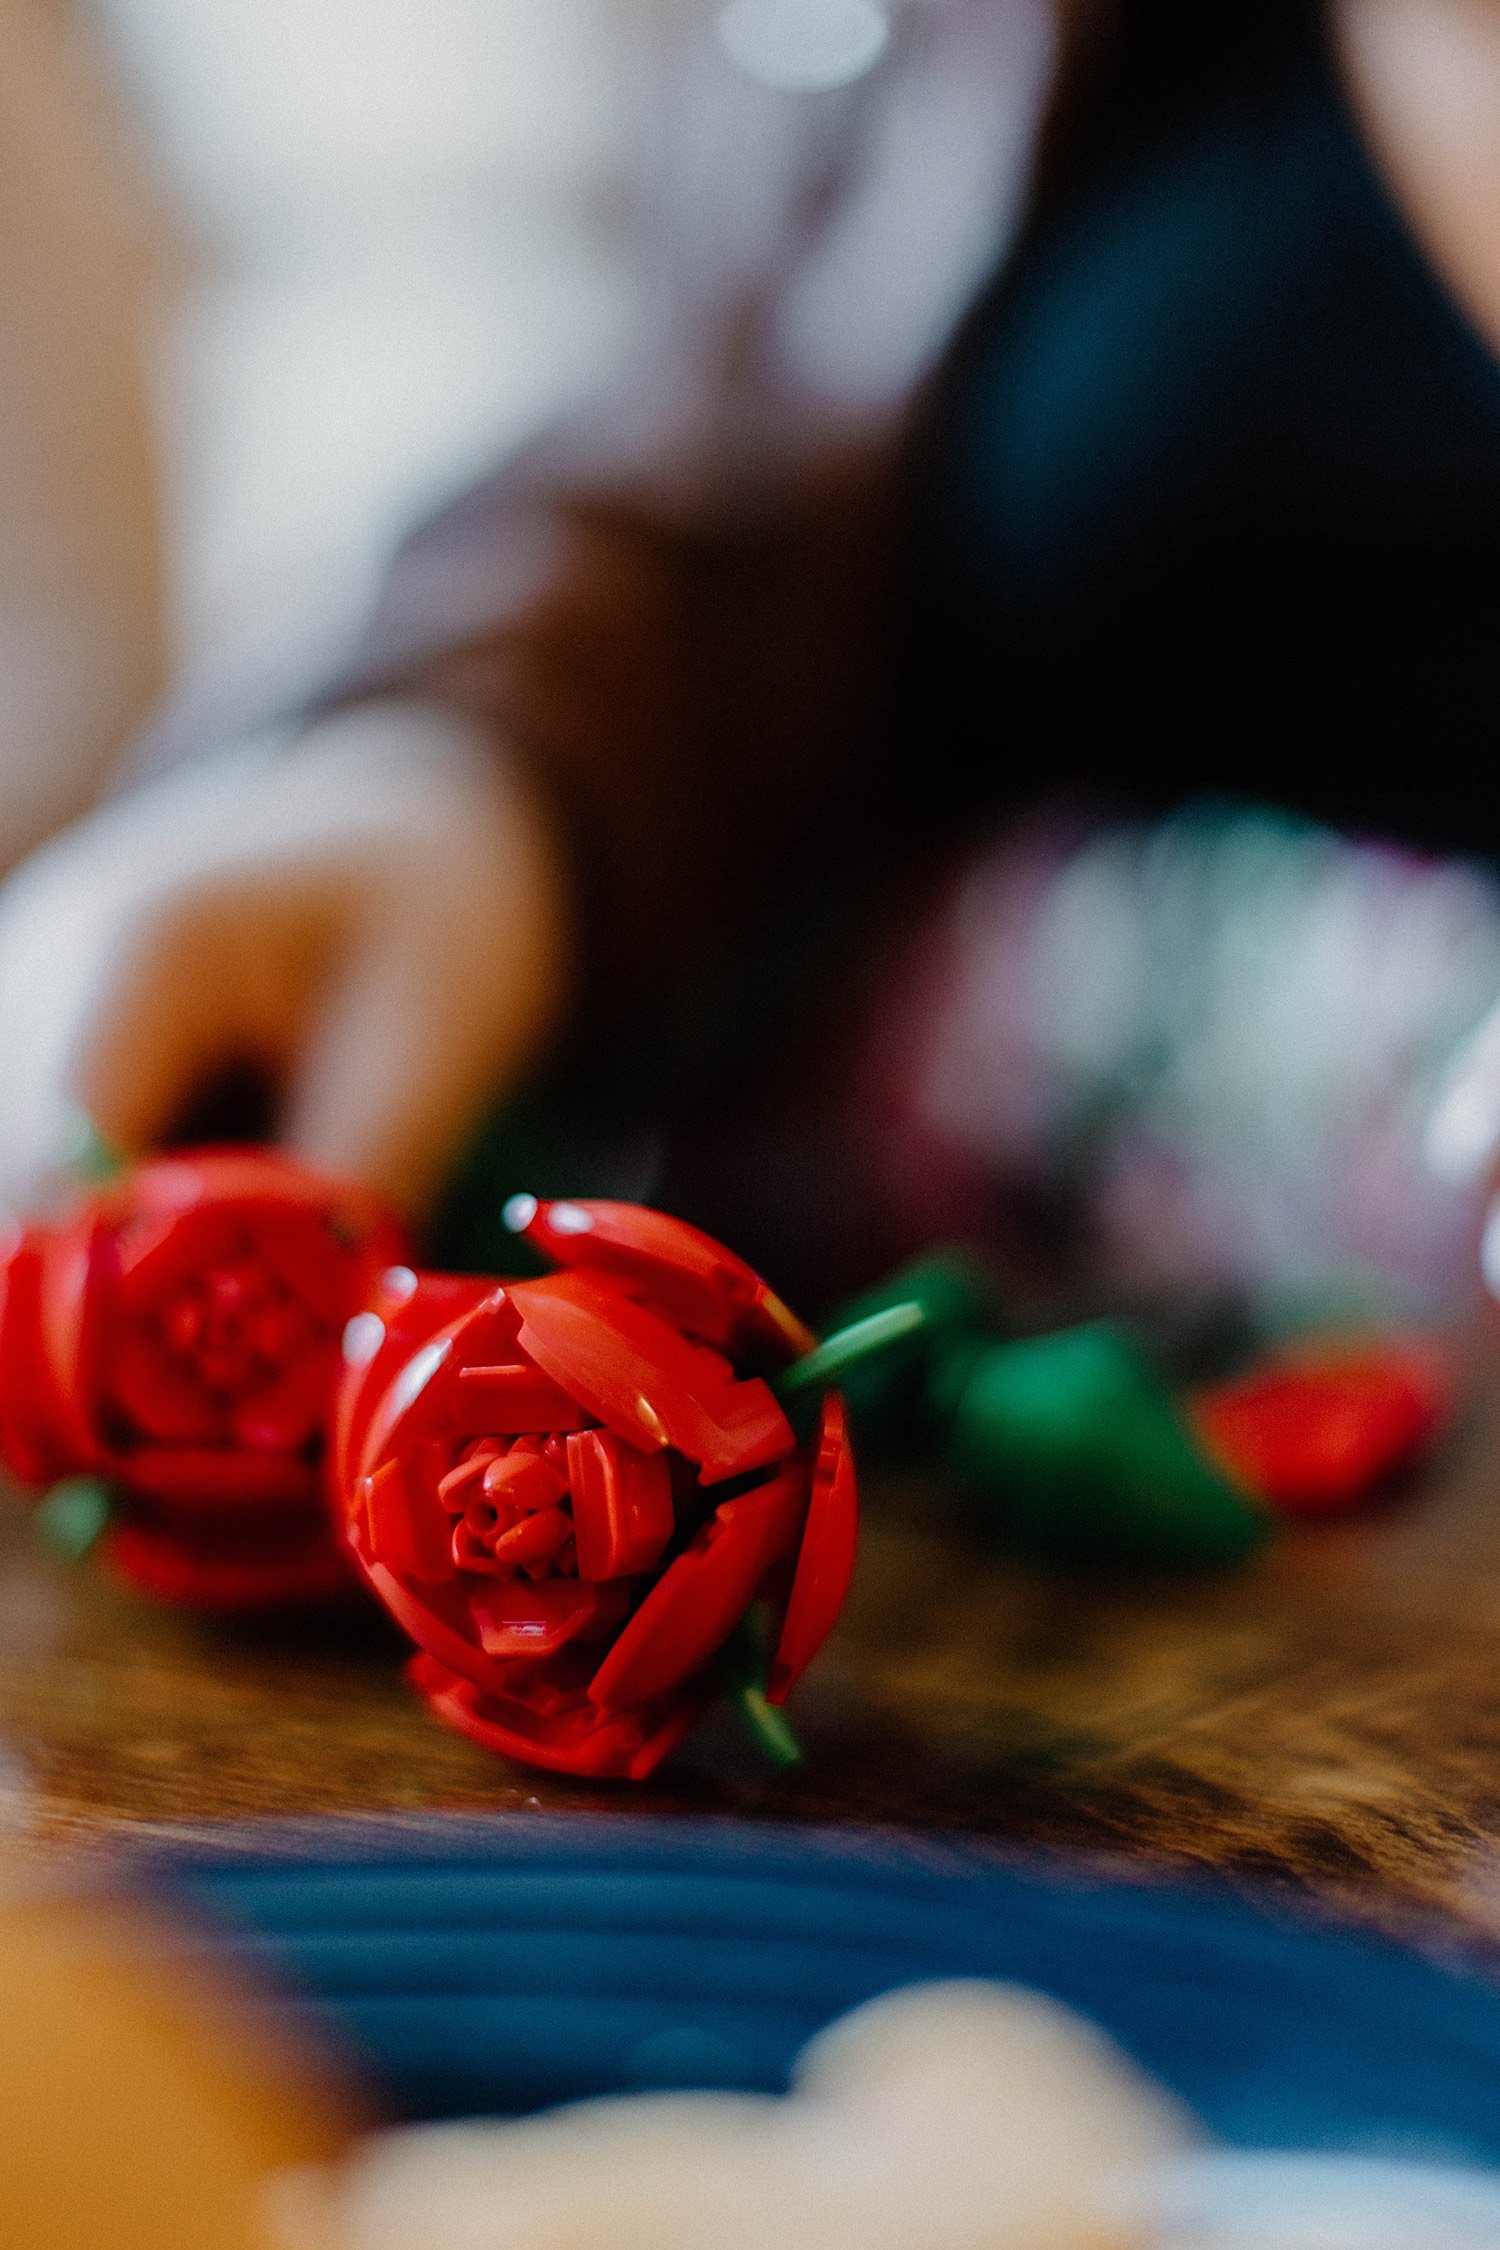 Lego roses on a table in a restaurant